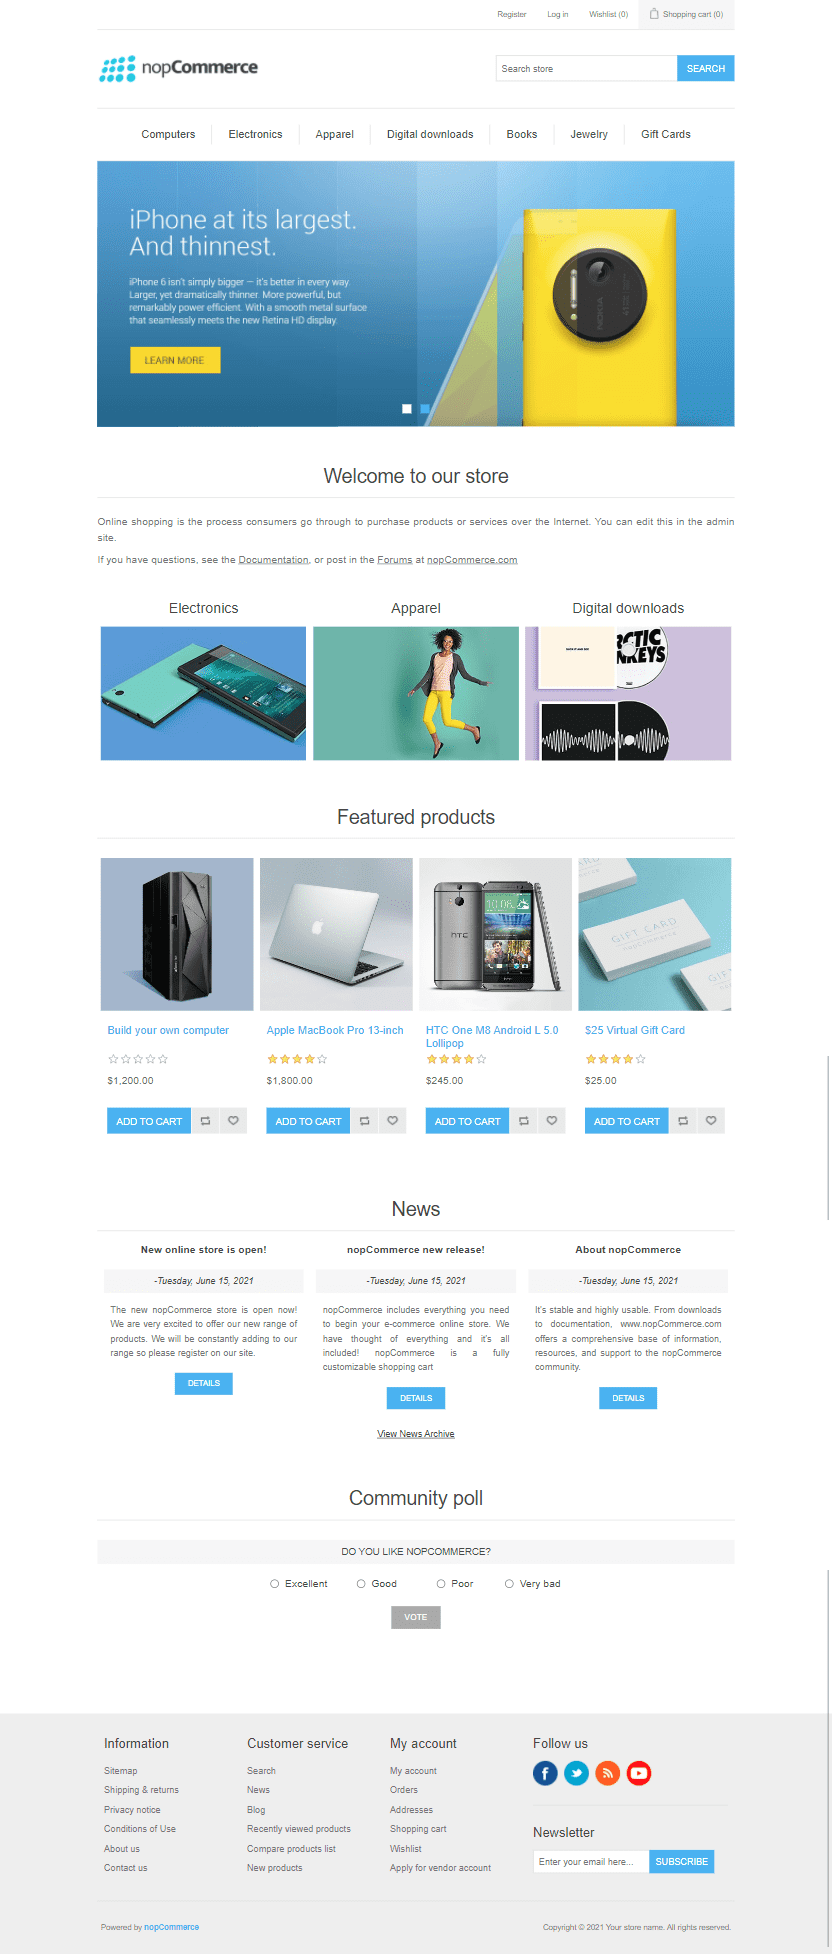 nopcommerce home page